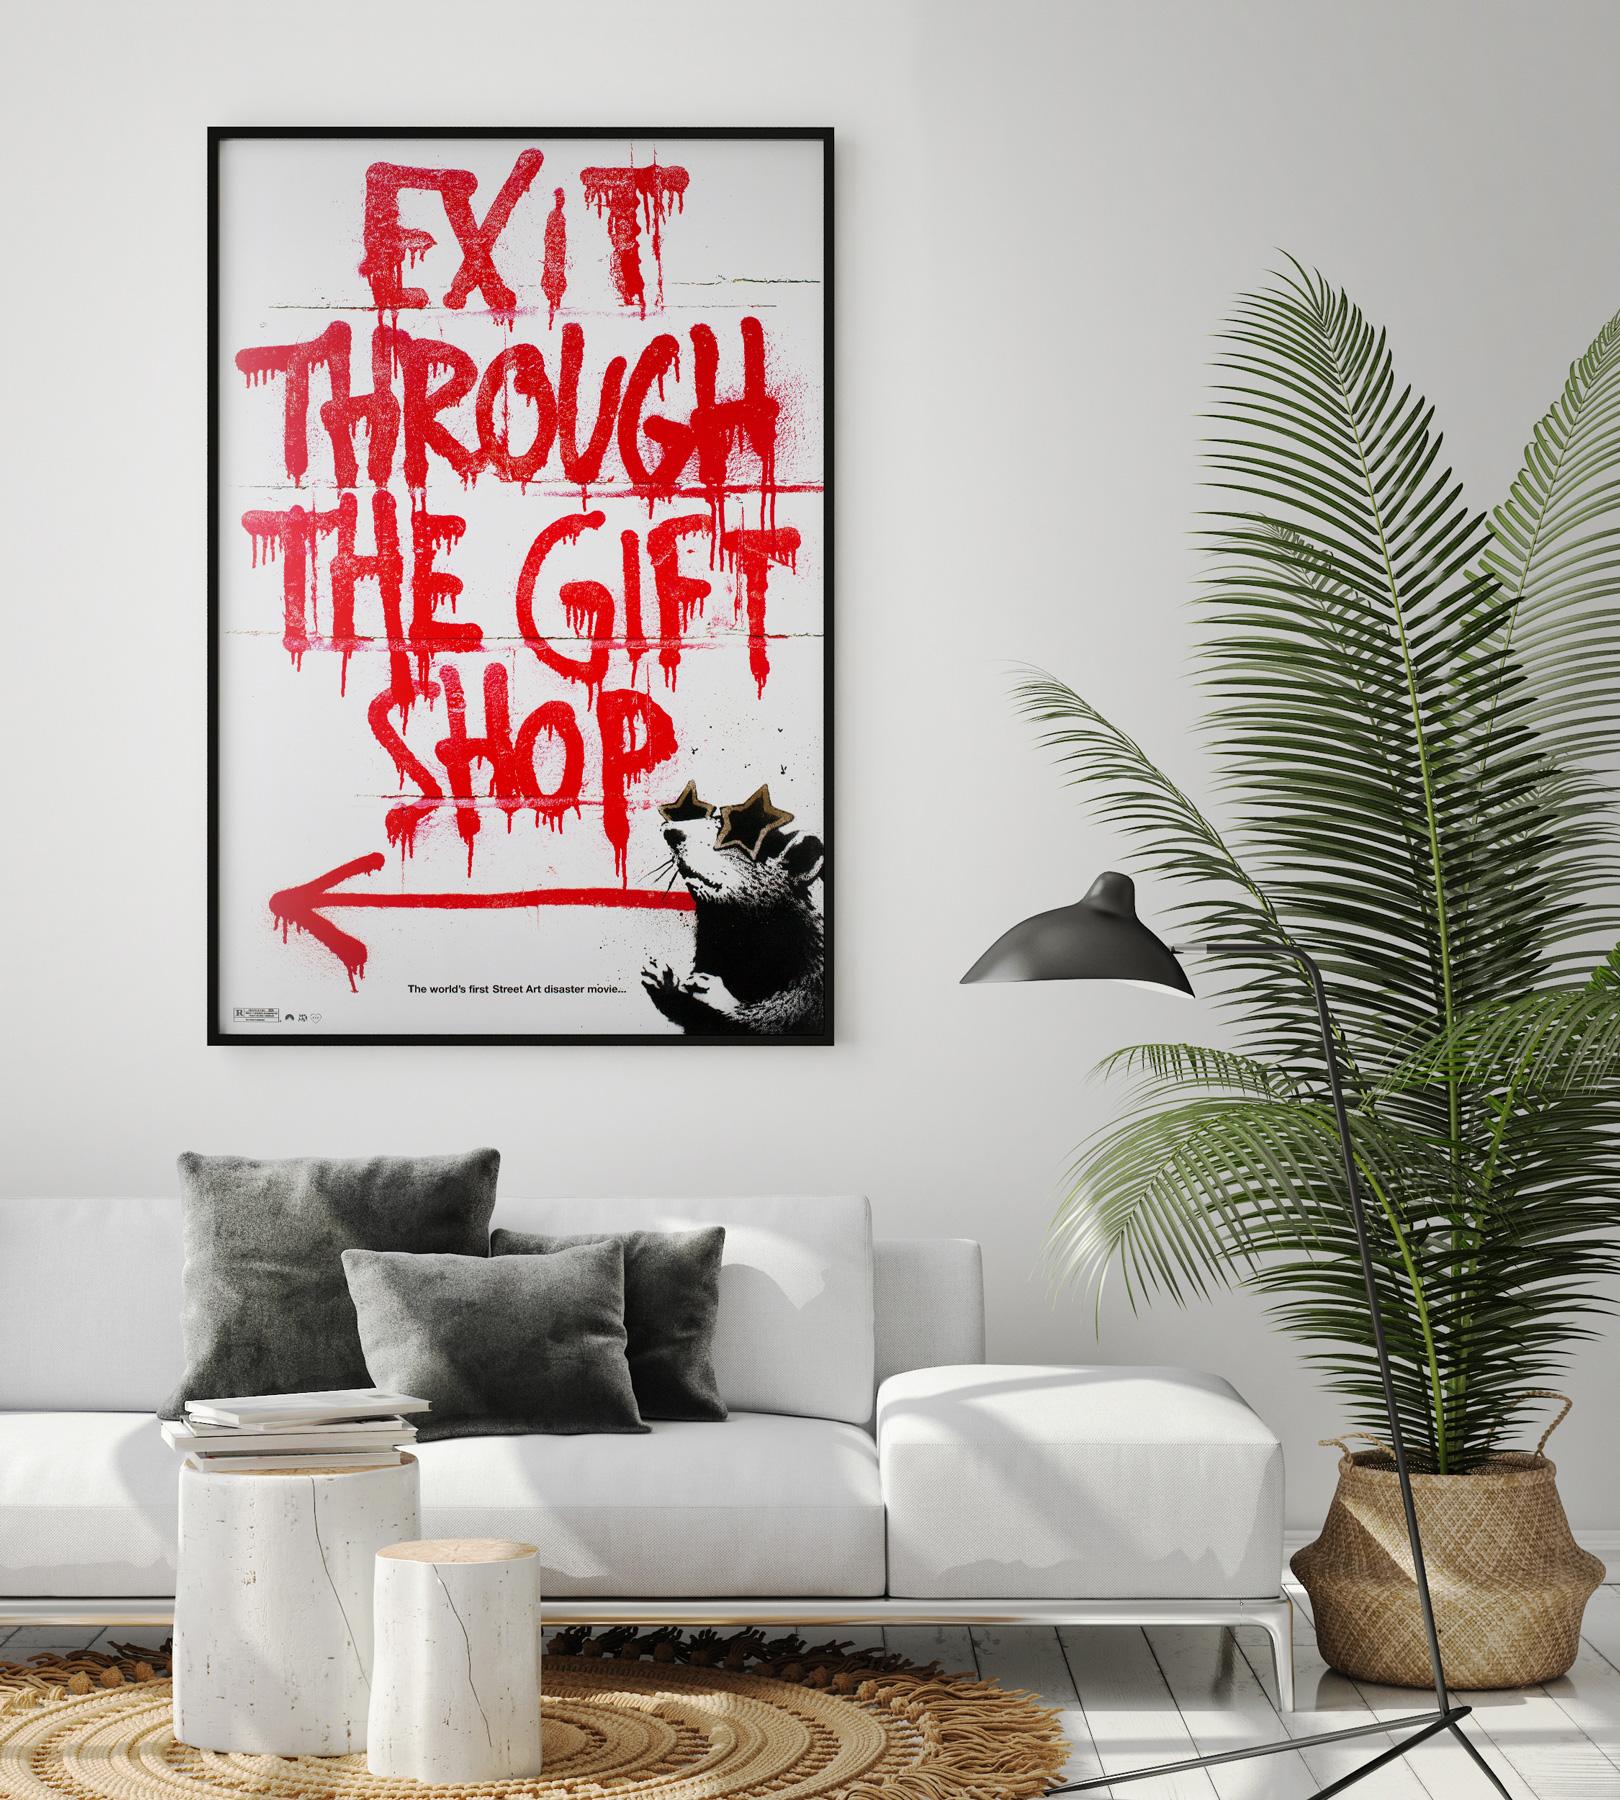 Guaranteed original One Sheet poster for the US release of the Oscar nominated documentary Exit Through the Gift shop. Produced and narrated by BANKSY.

This original vintage movie poster is sized 27 x 40 inches. It will be sent rolled (unframed).